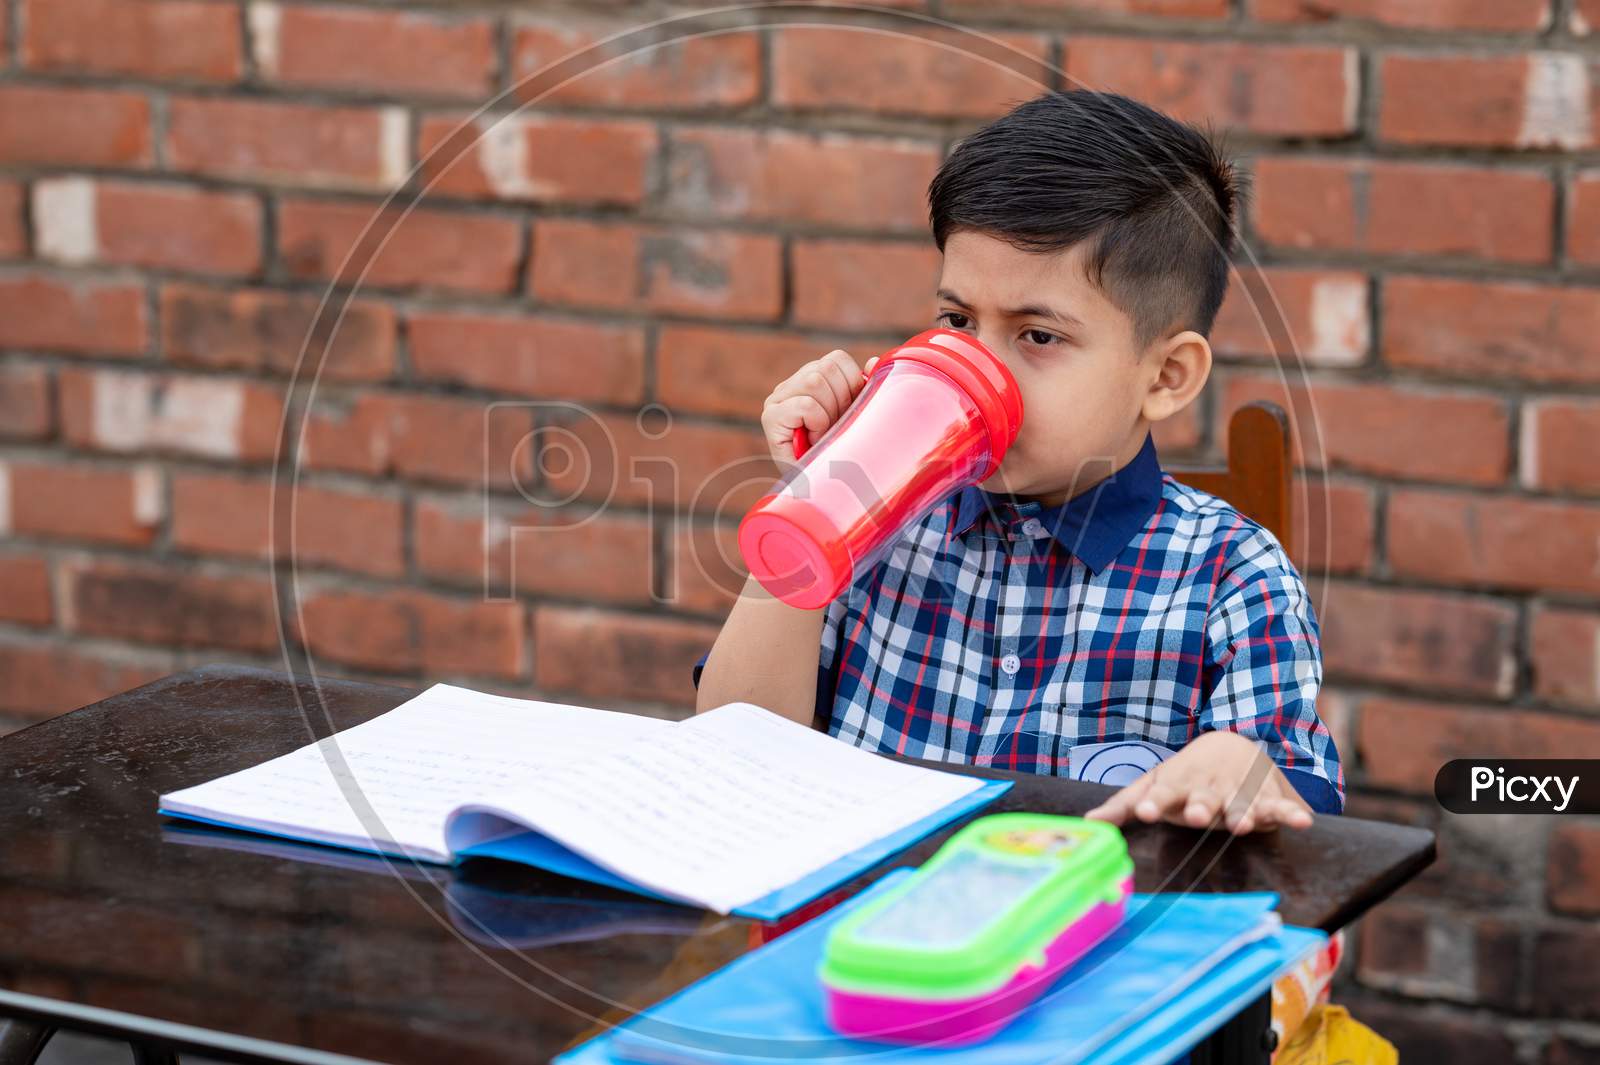 Primary school student drinking water with red water bottle while sitting in class on study table. Indian school student in classroom.